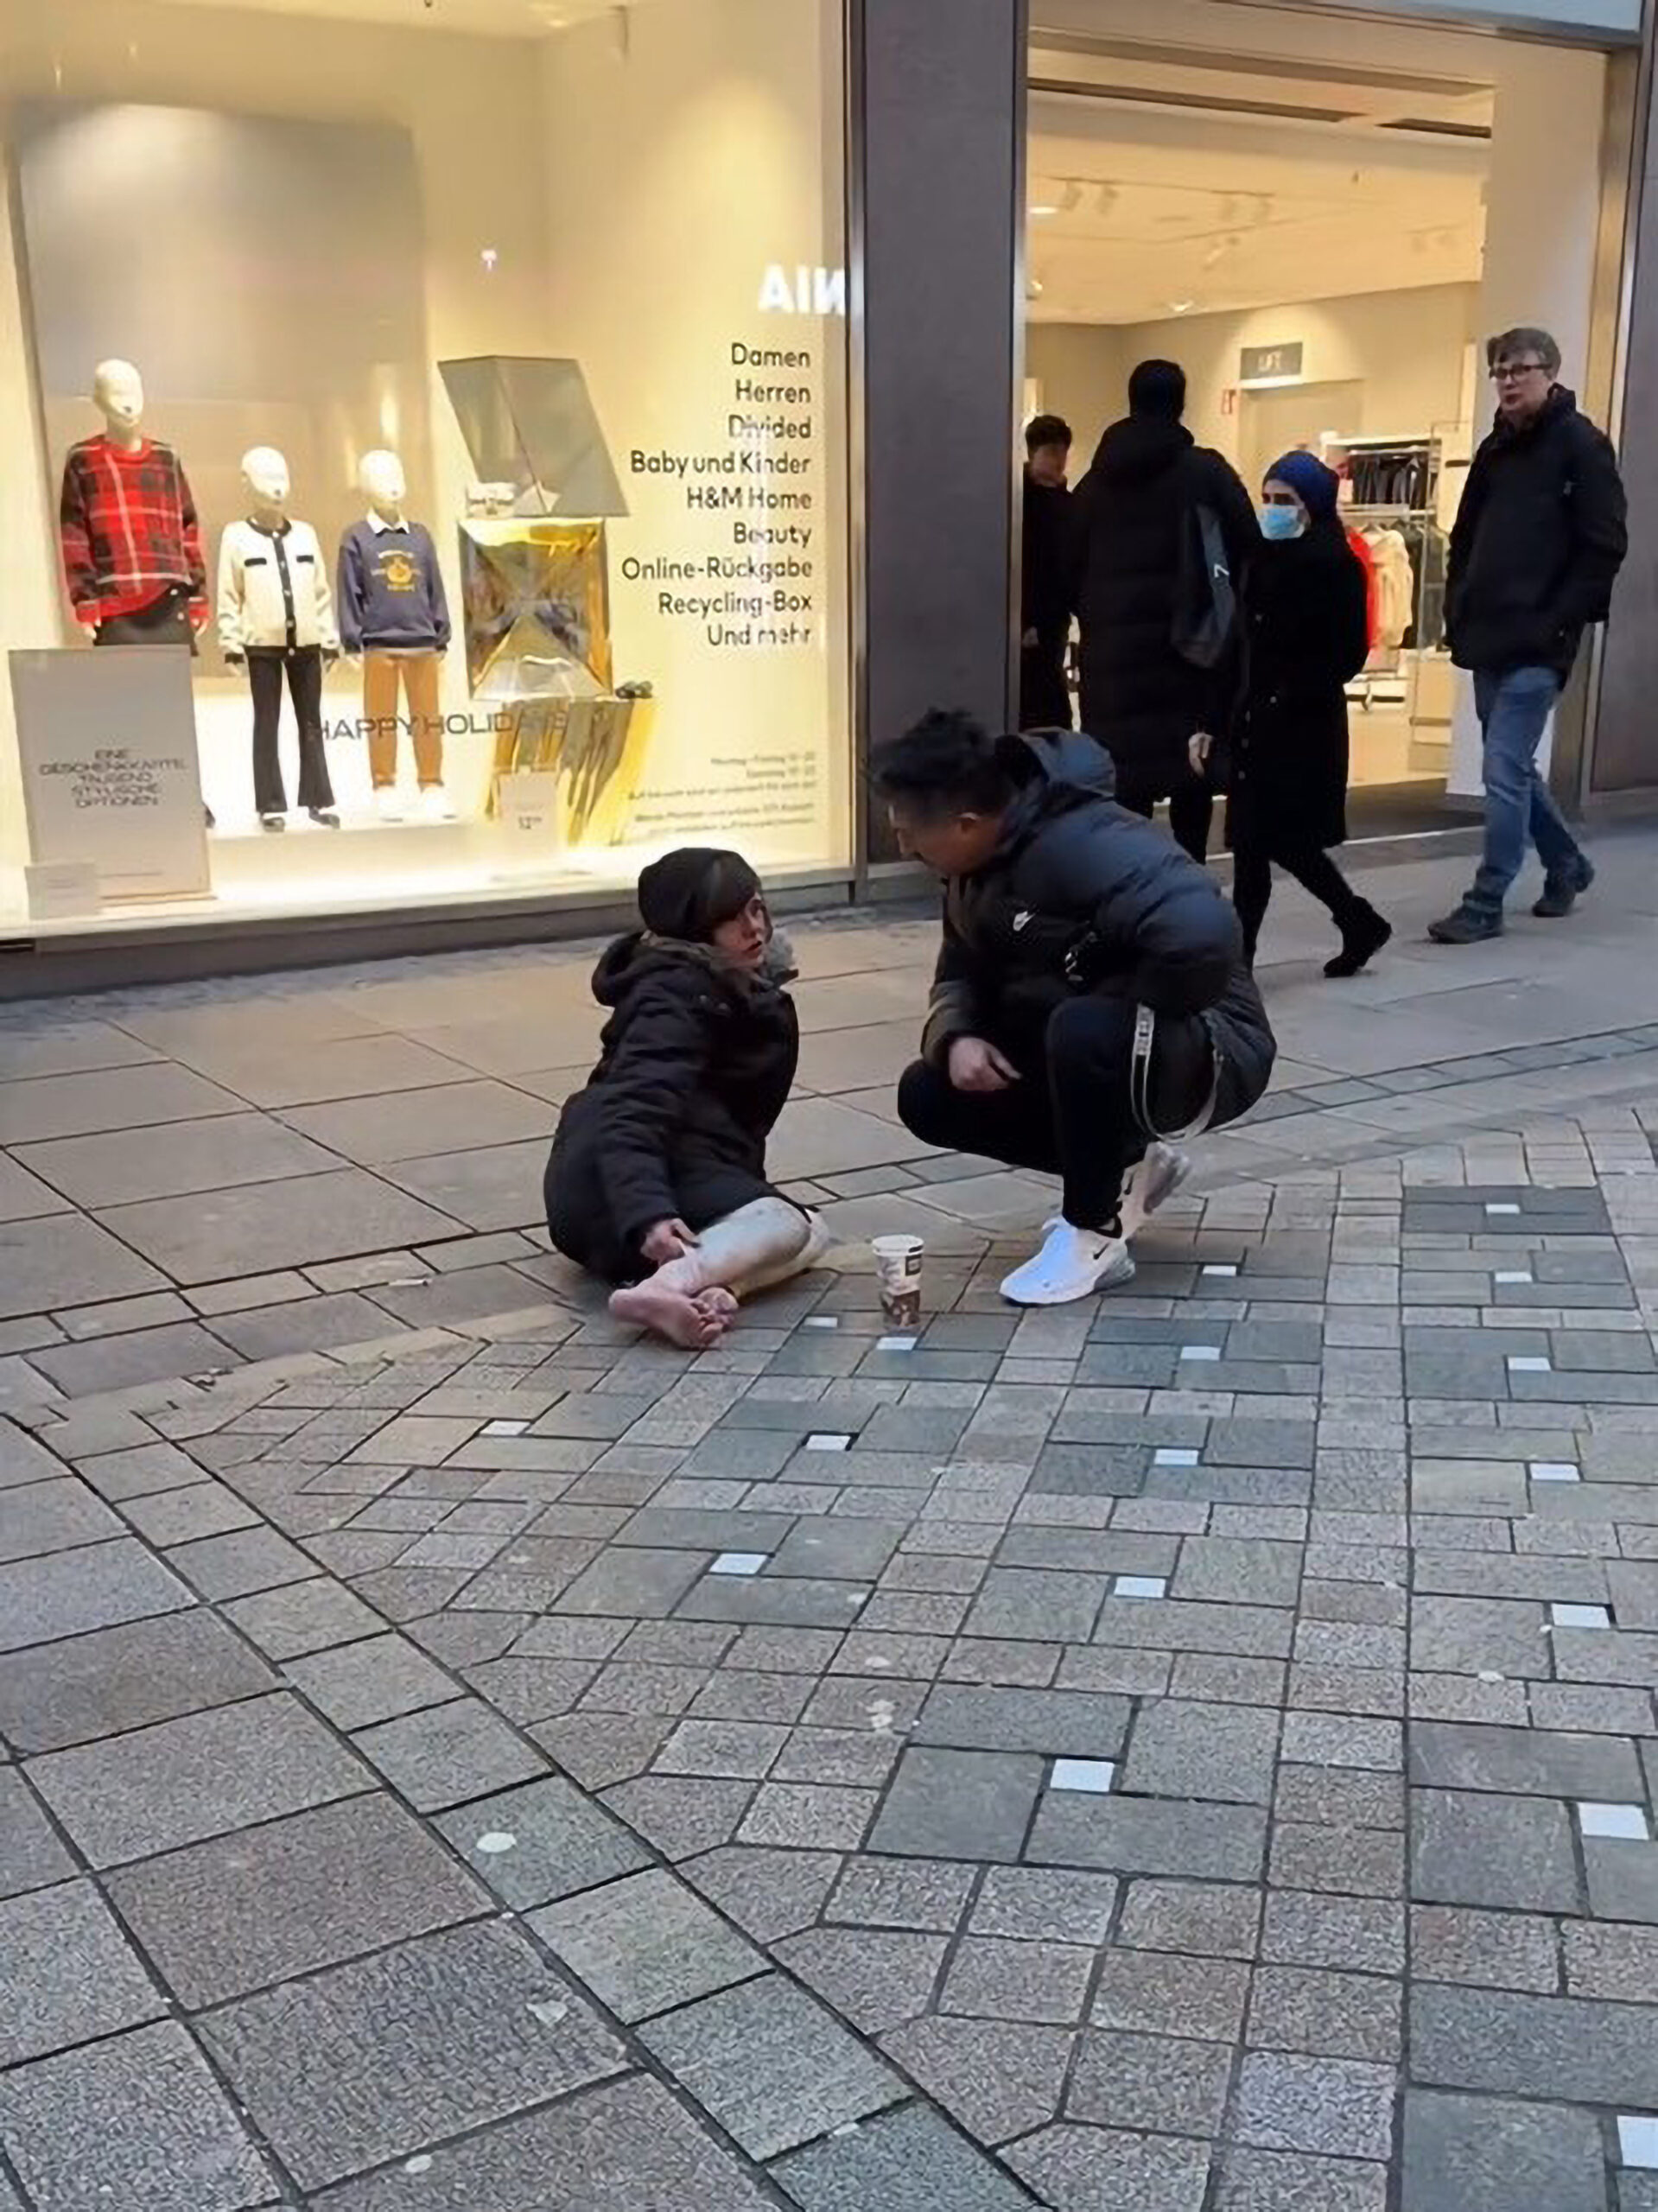 Lottery Millionaire Chico Abandons Selfie Session With Fans To Buy Socks And Shoes For Homeless Woman